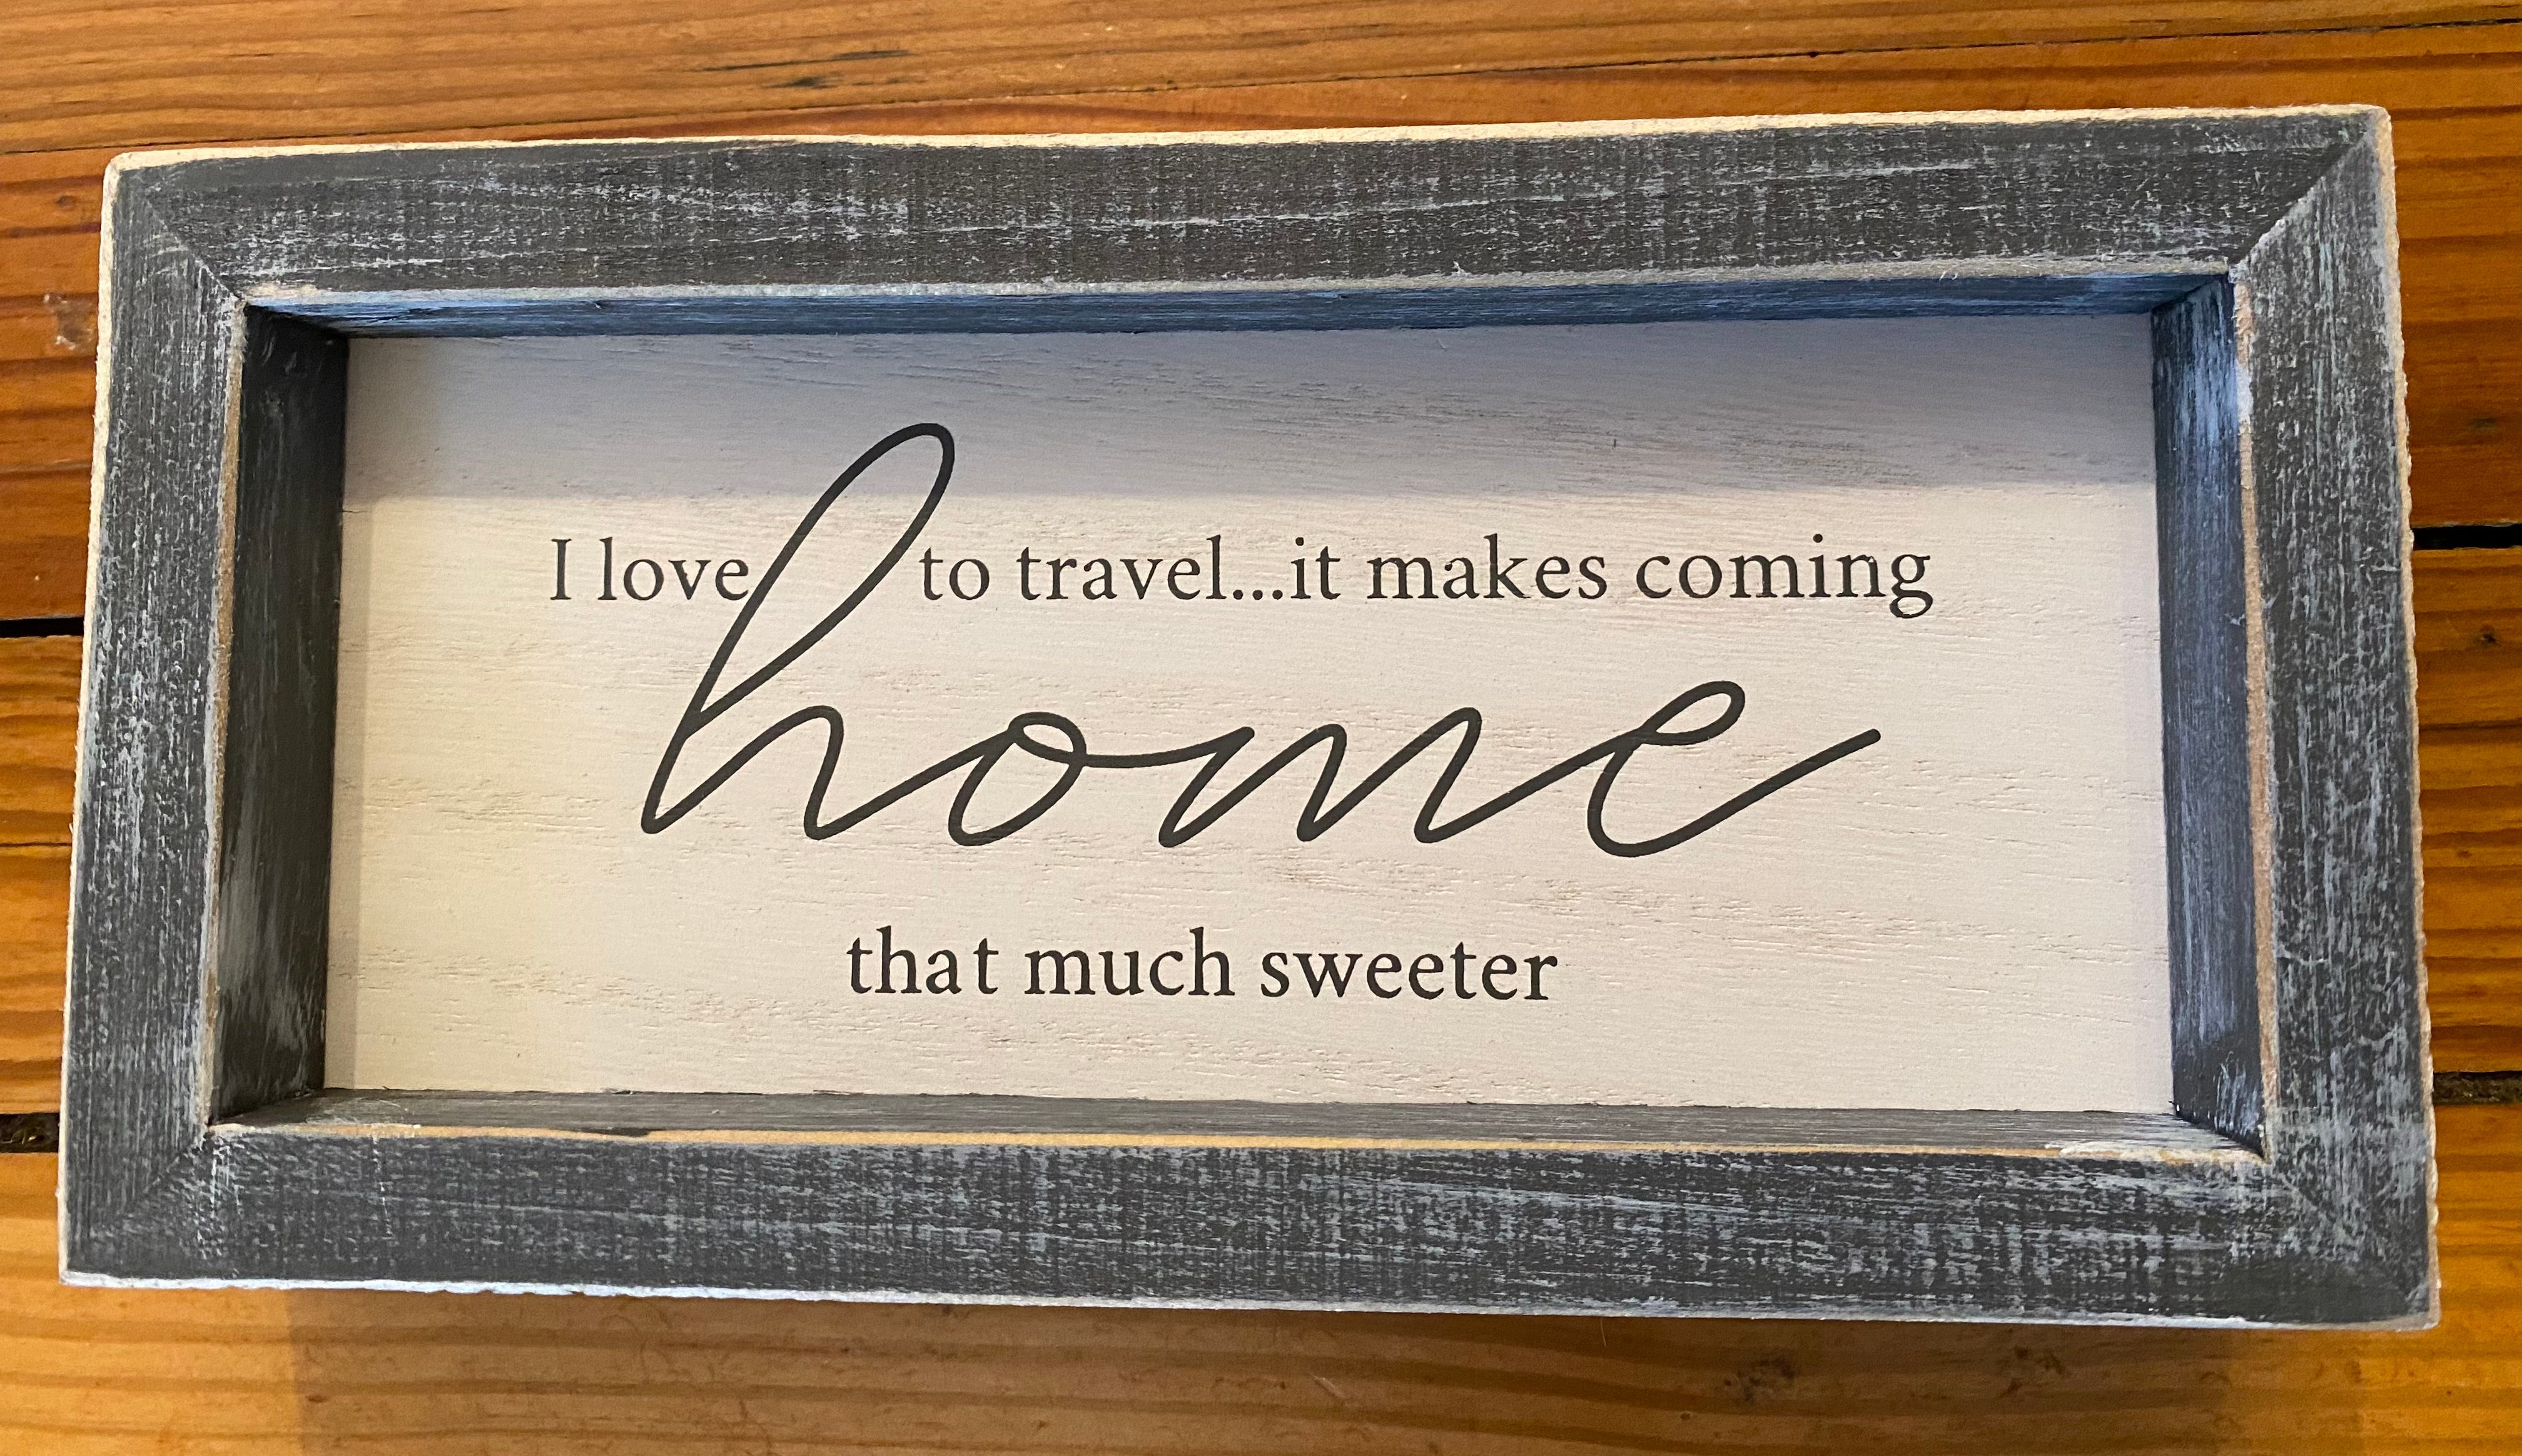 I love to travel...it makes coming home that much sweeter